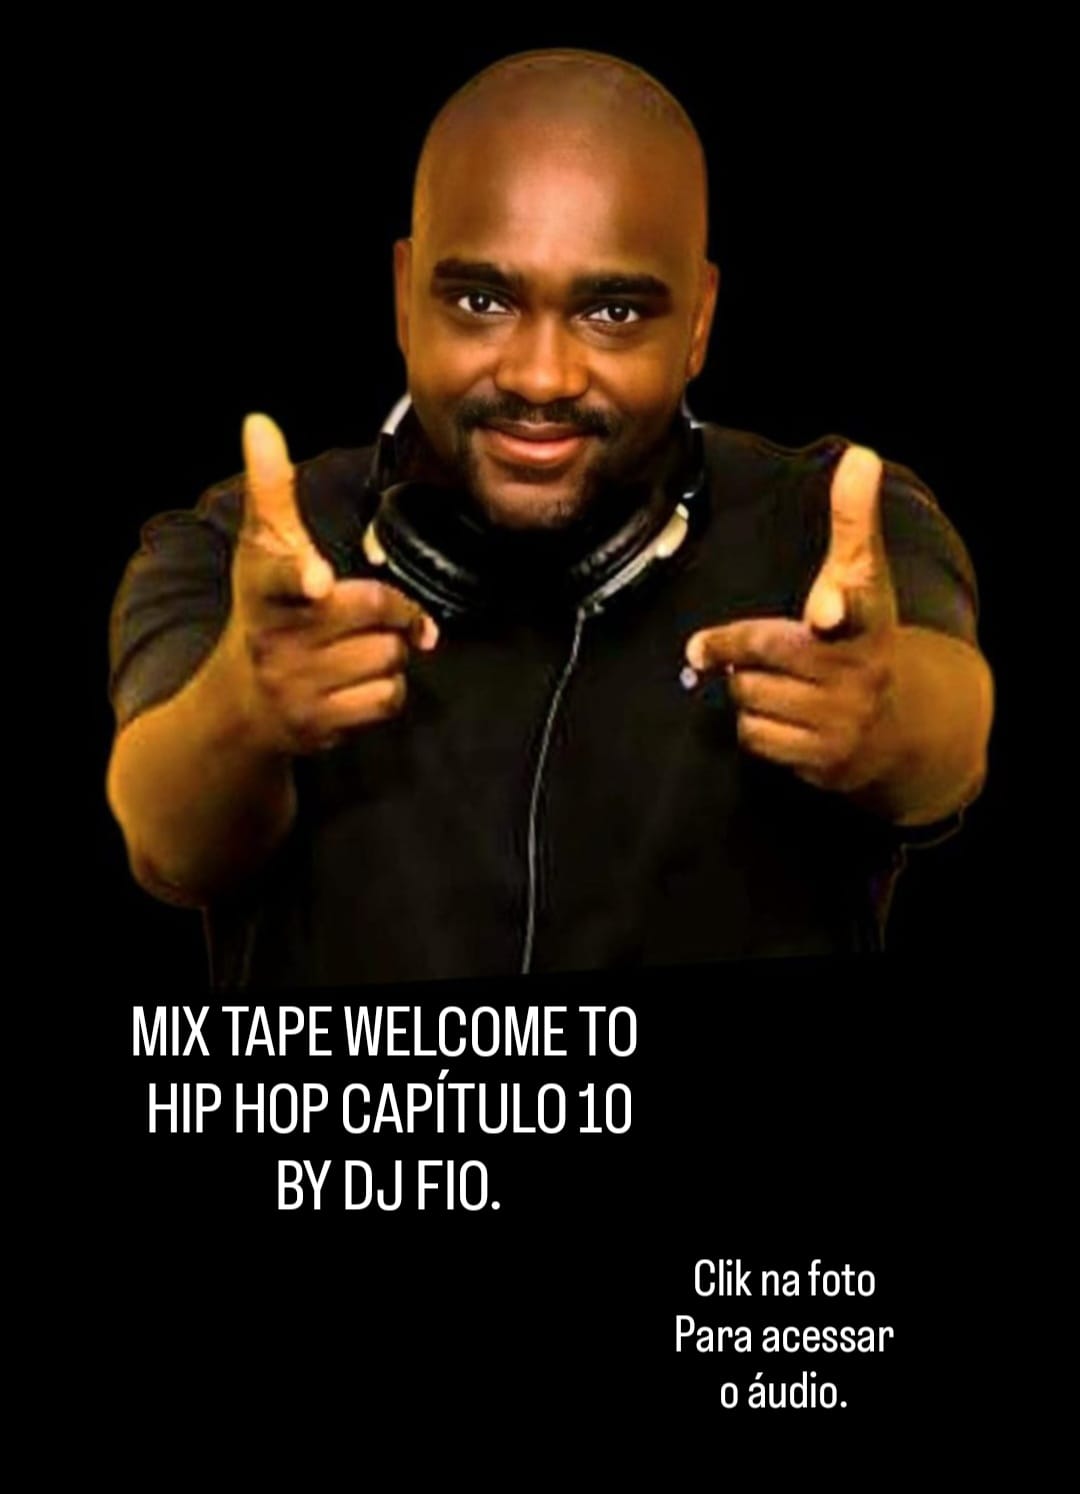 MIX TAPE WELCOME TO HIP HOP CAPÍTULO 10 BY DJ FIO. aaa